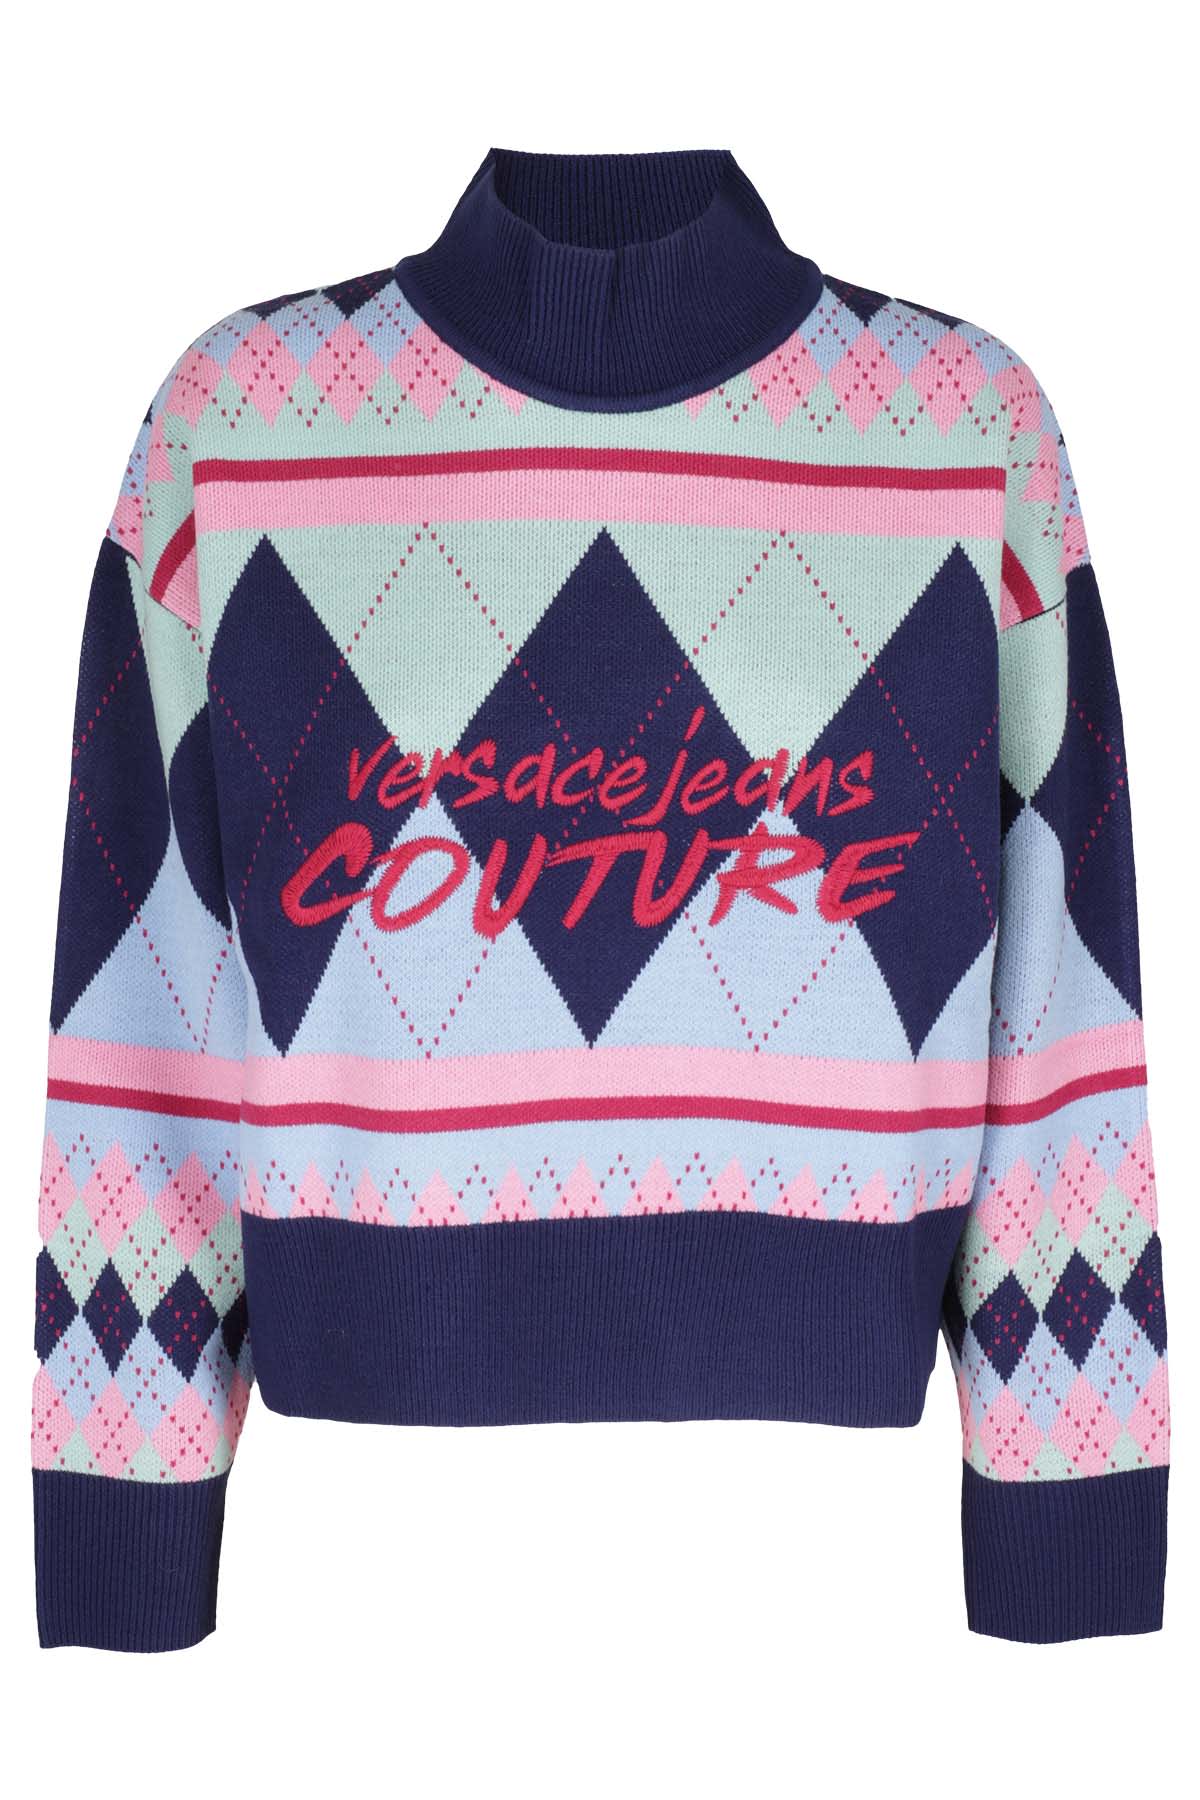 Versace Jeans Couture Argyle Mix Knitwear Mix Wool